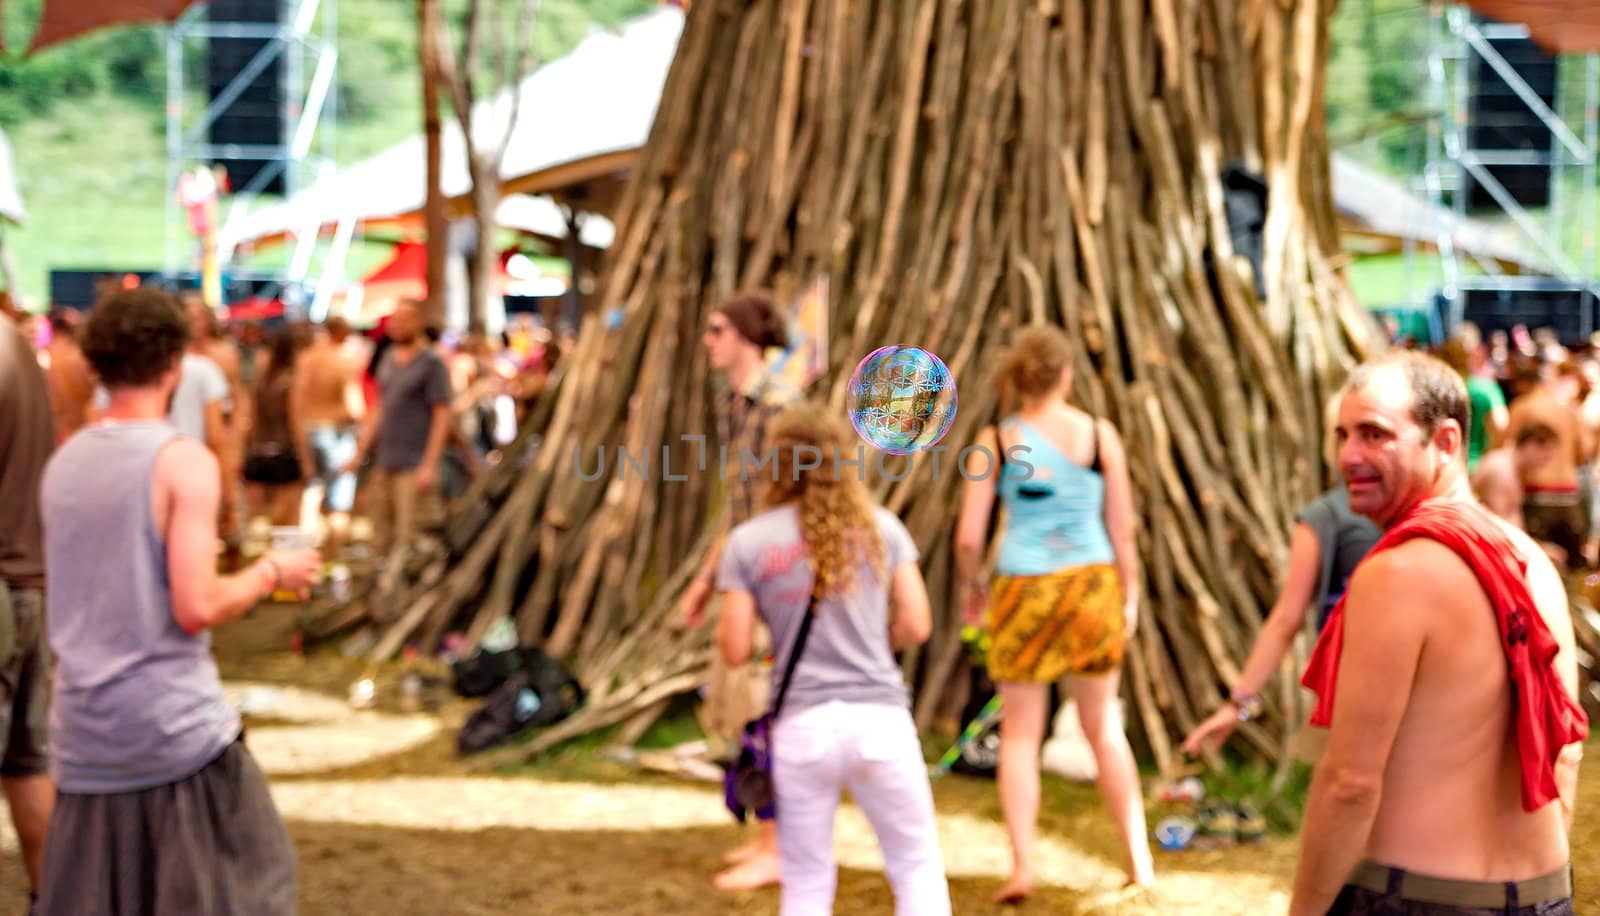 OZORA, HUNGARY - AUGUST 01: Man watching bubles on Ozora Festiva by anderm